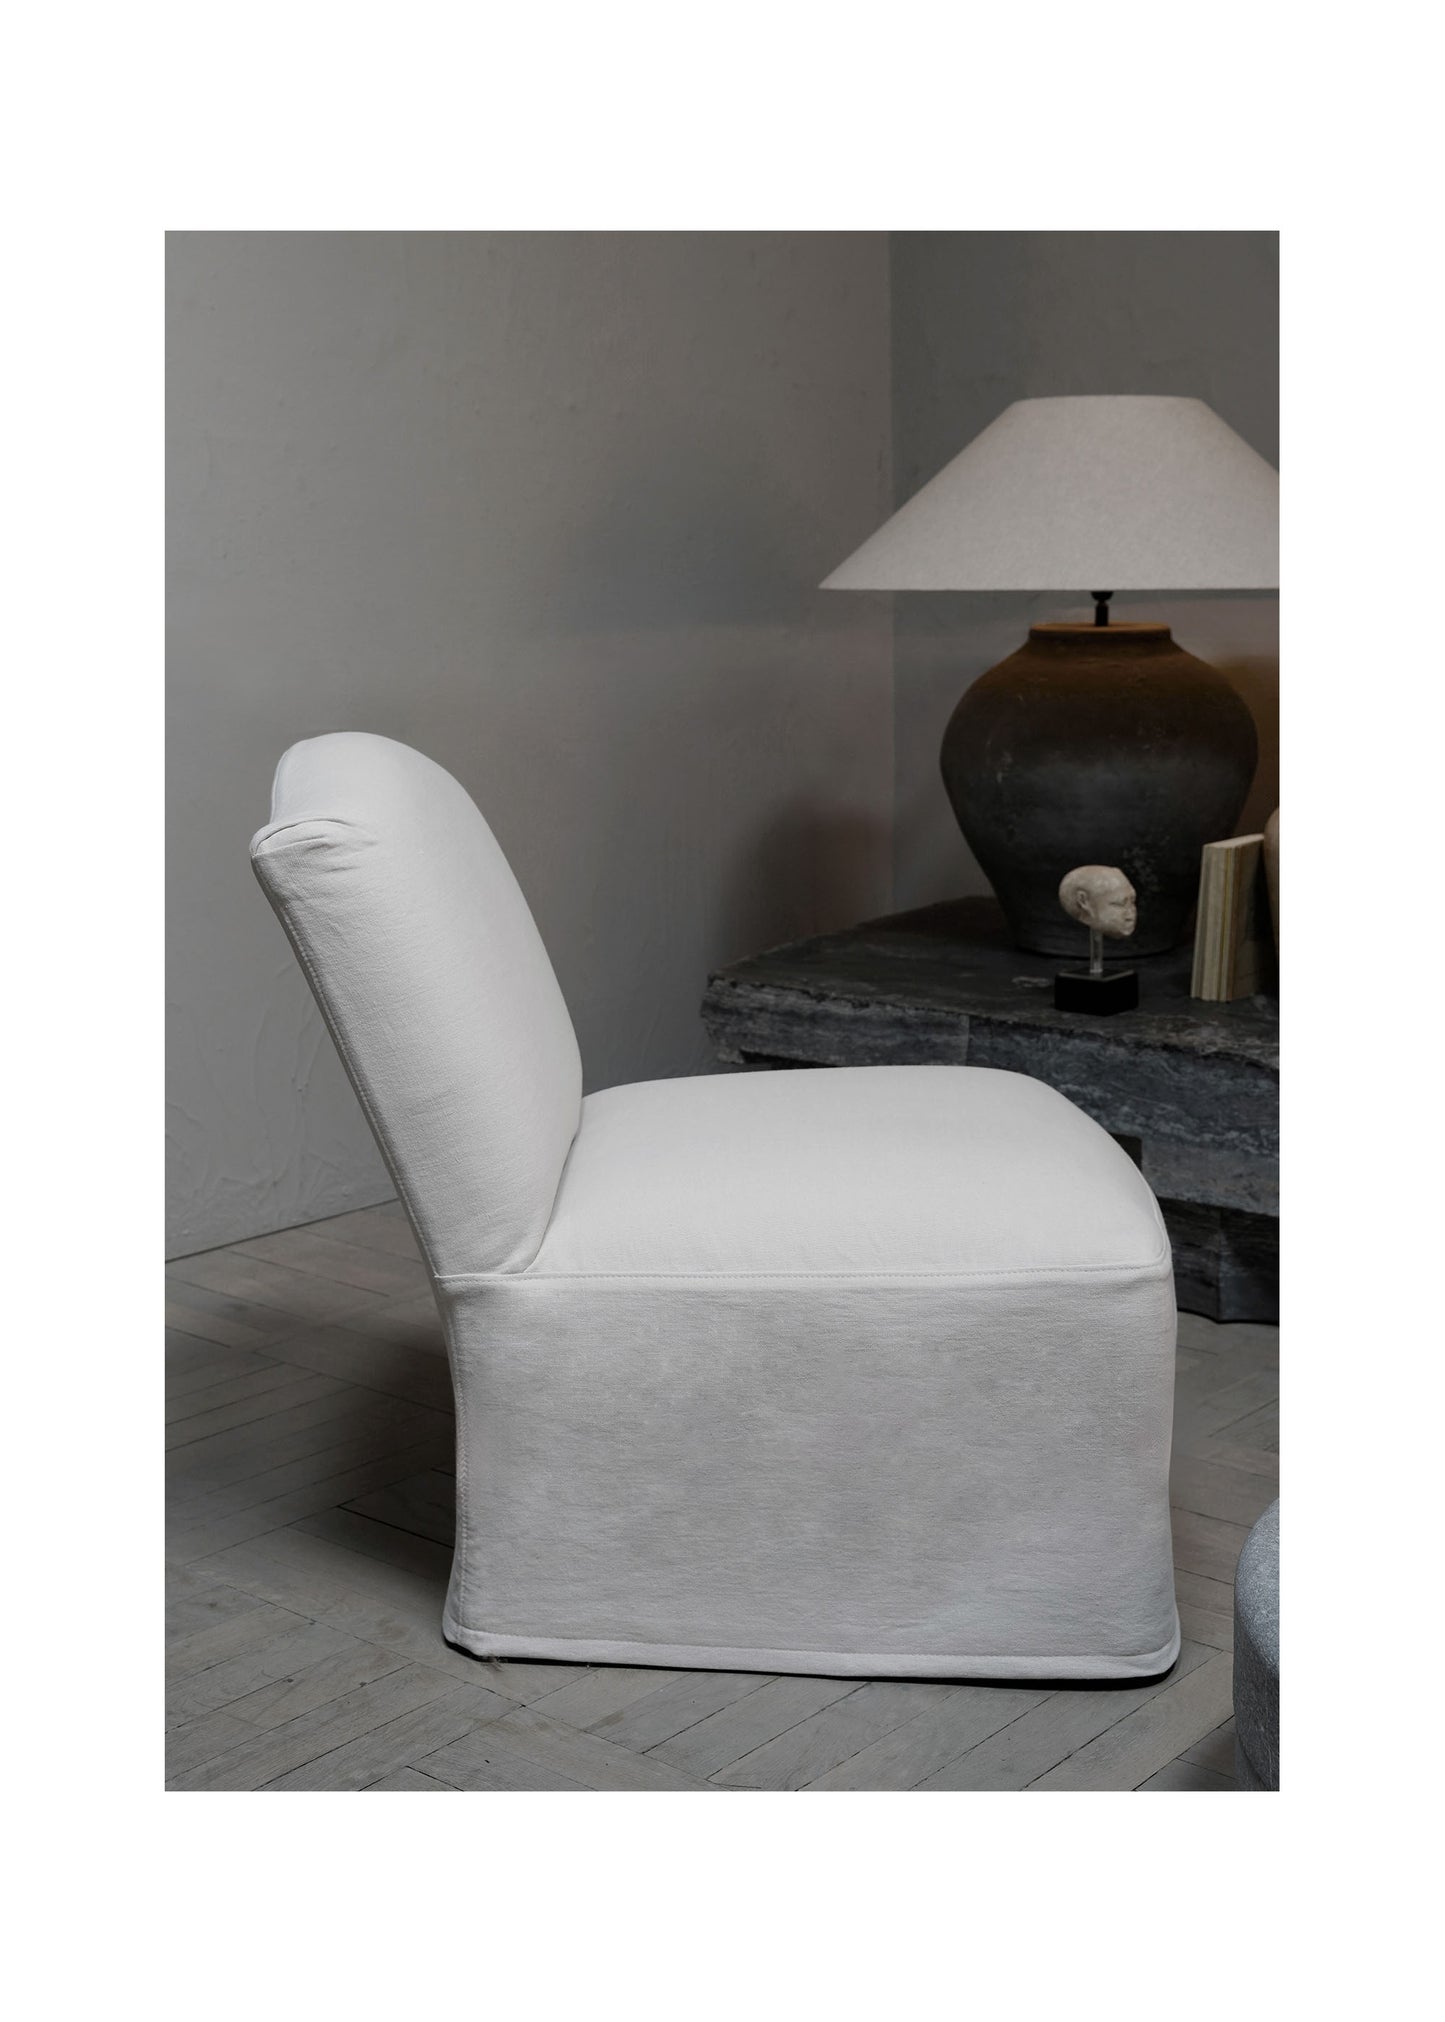 VENICE CHAIR by OLIVER GUSTAV